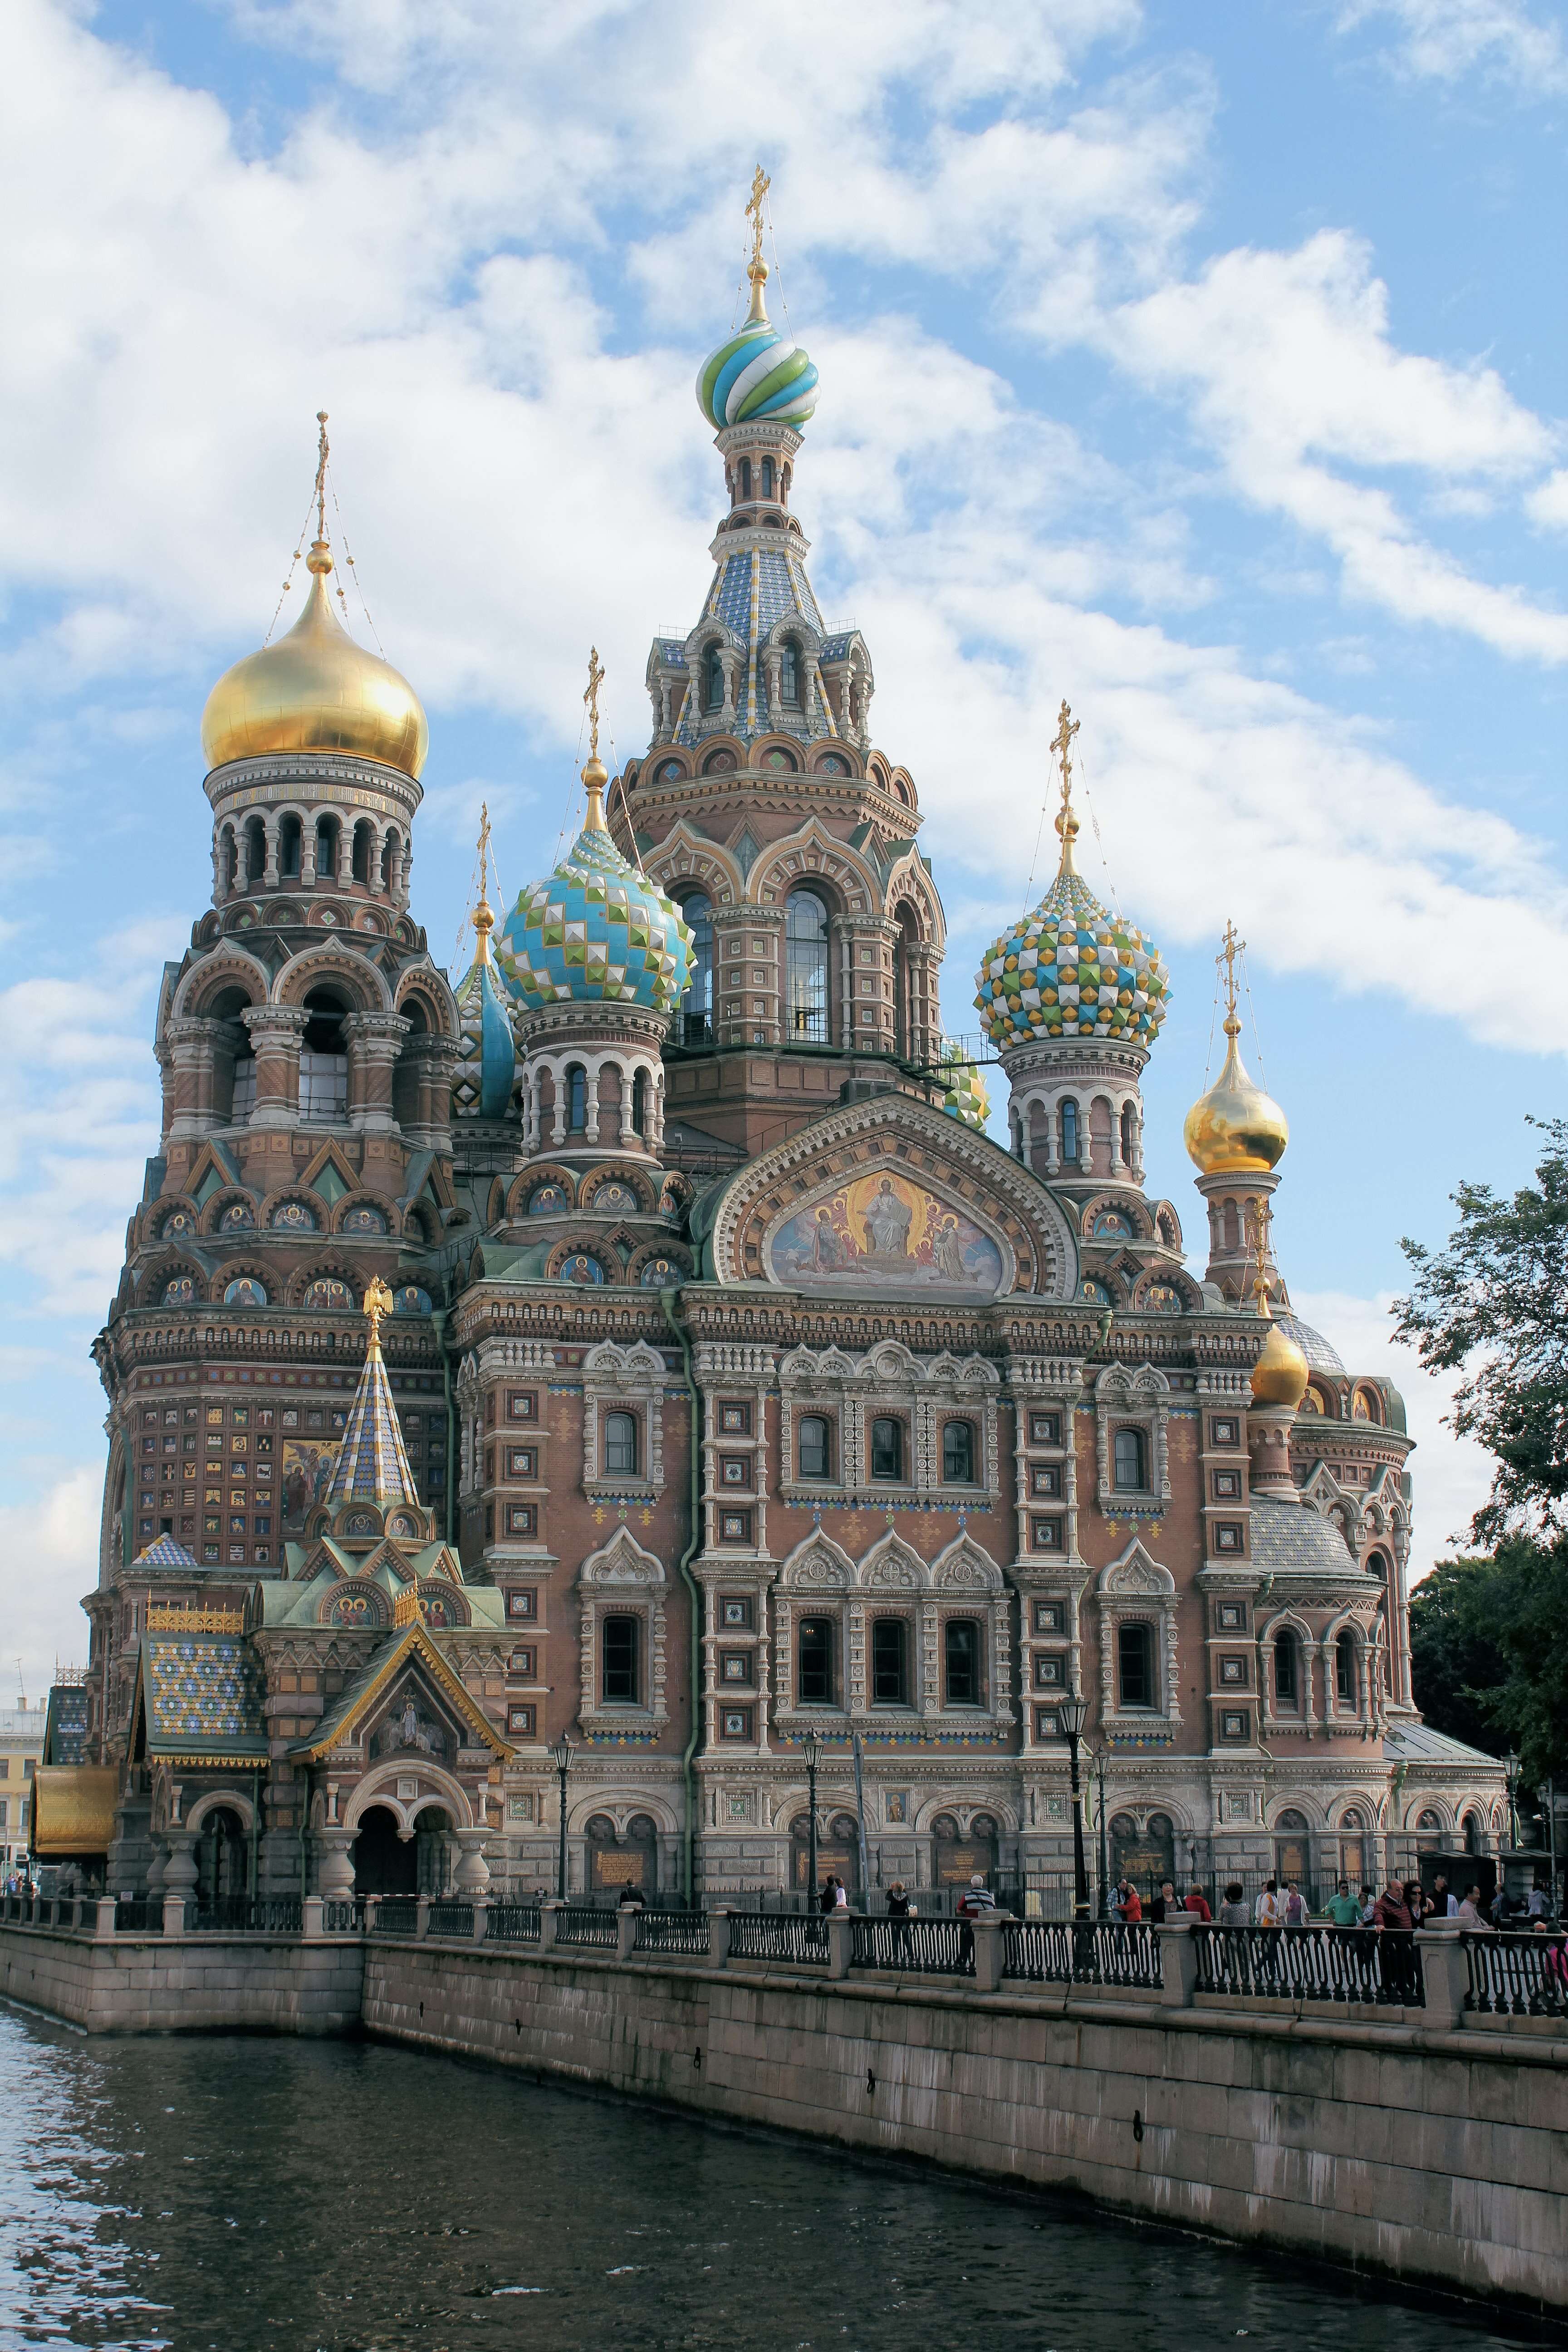 the spires of the Church of the Savior on Spilled Blood in Saint Petersburg, Russia